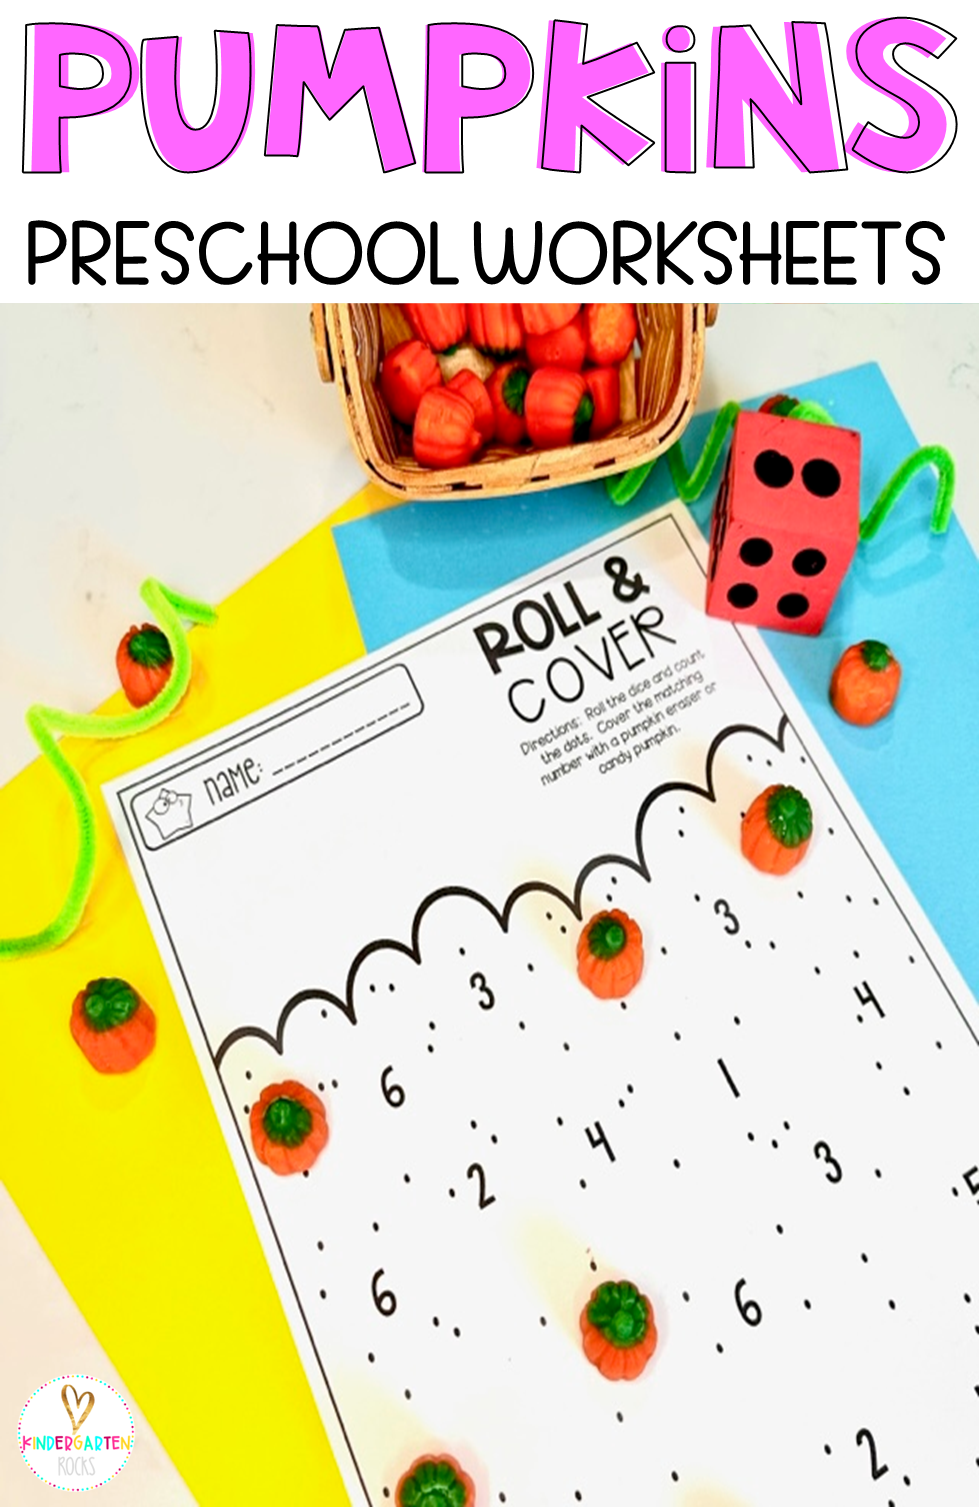 Pumpkin Math and Literacy Worksheets and Printables for Preschool is perfect for your preschool classroom. The boys and girls will roll the dice, count the dots and cover the number using a sticker or pumpkin candy..